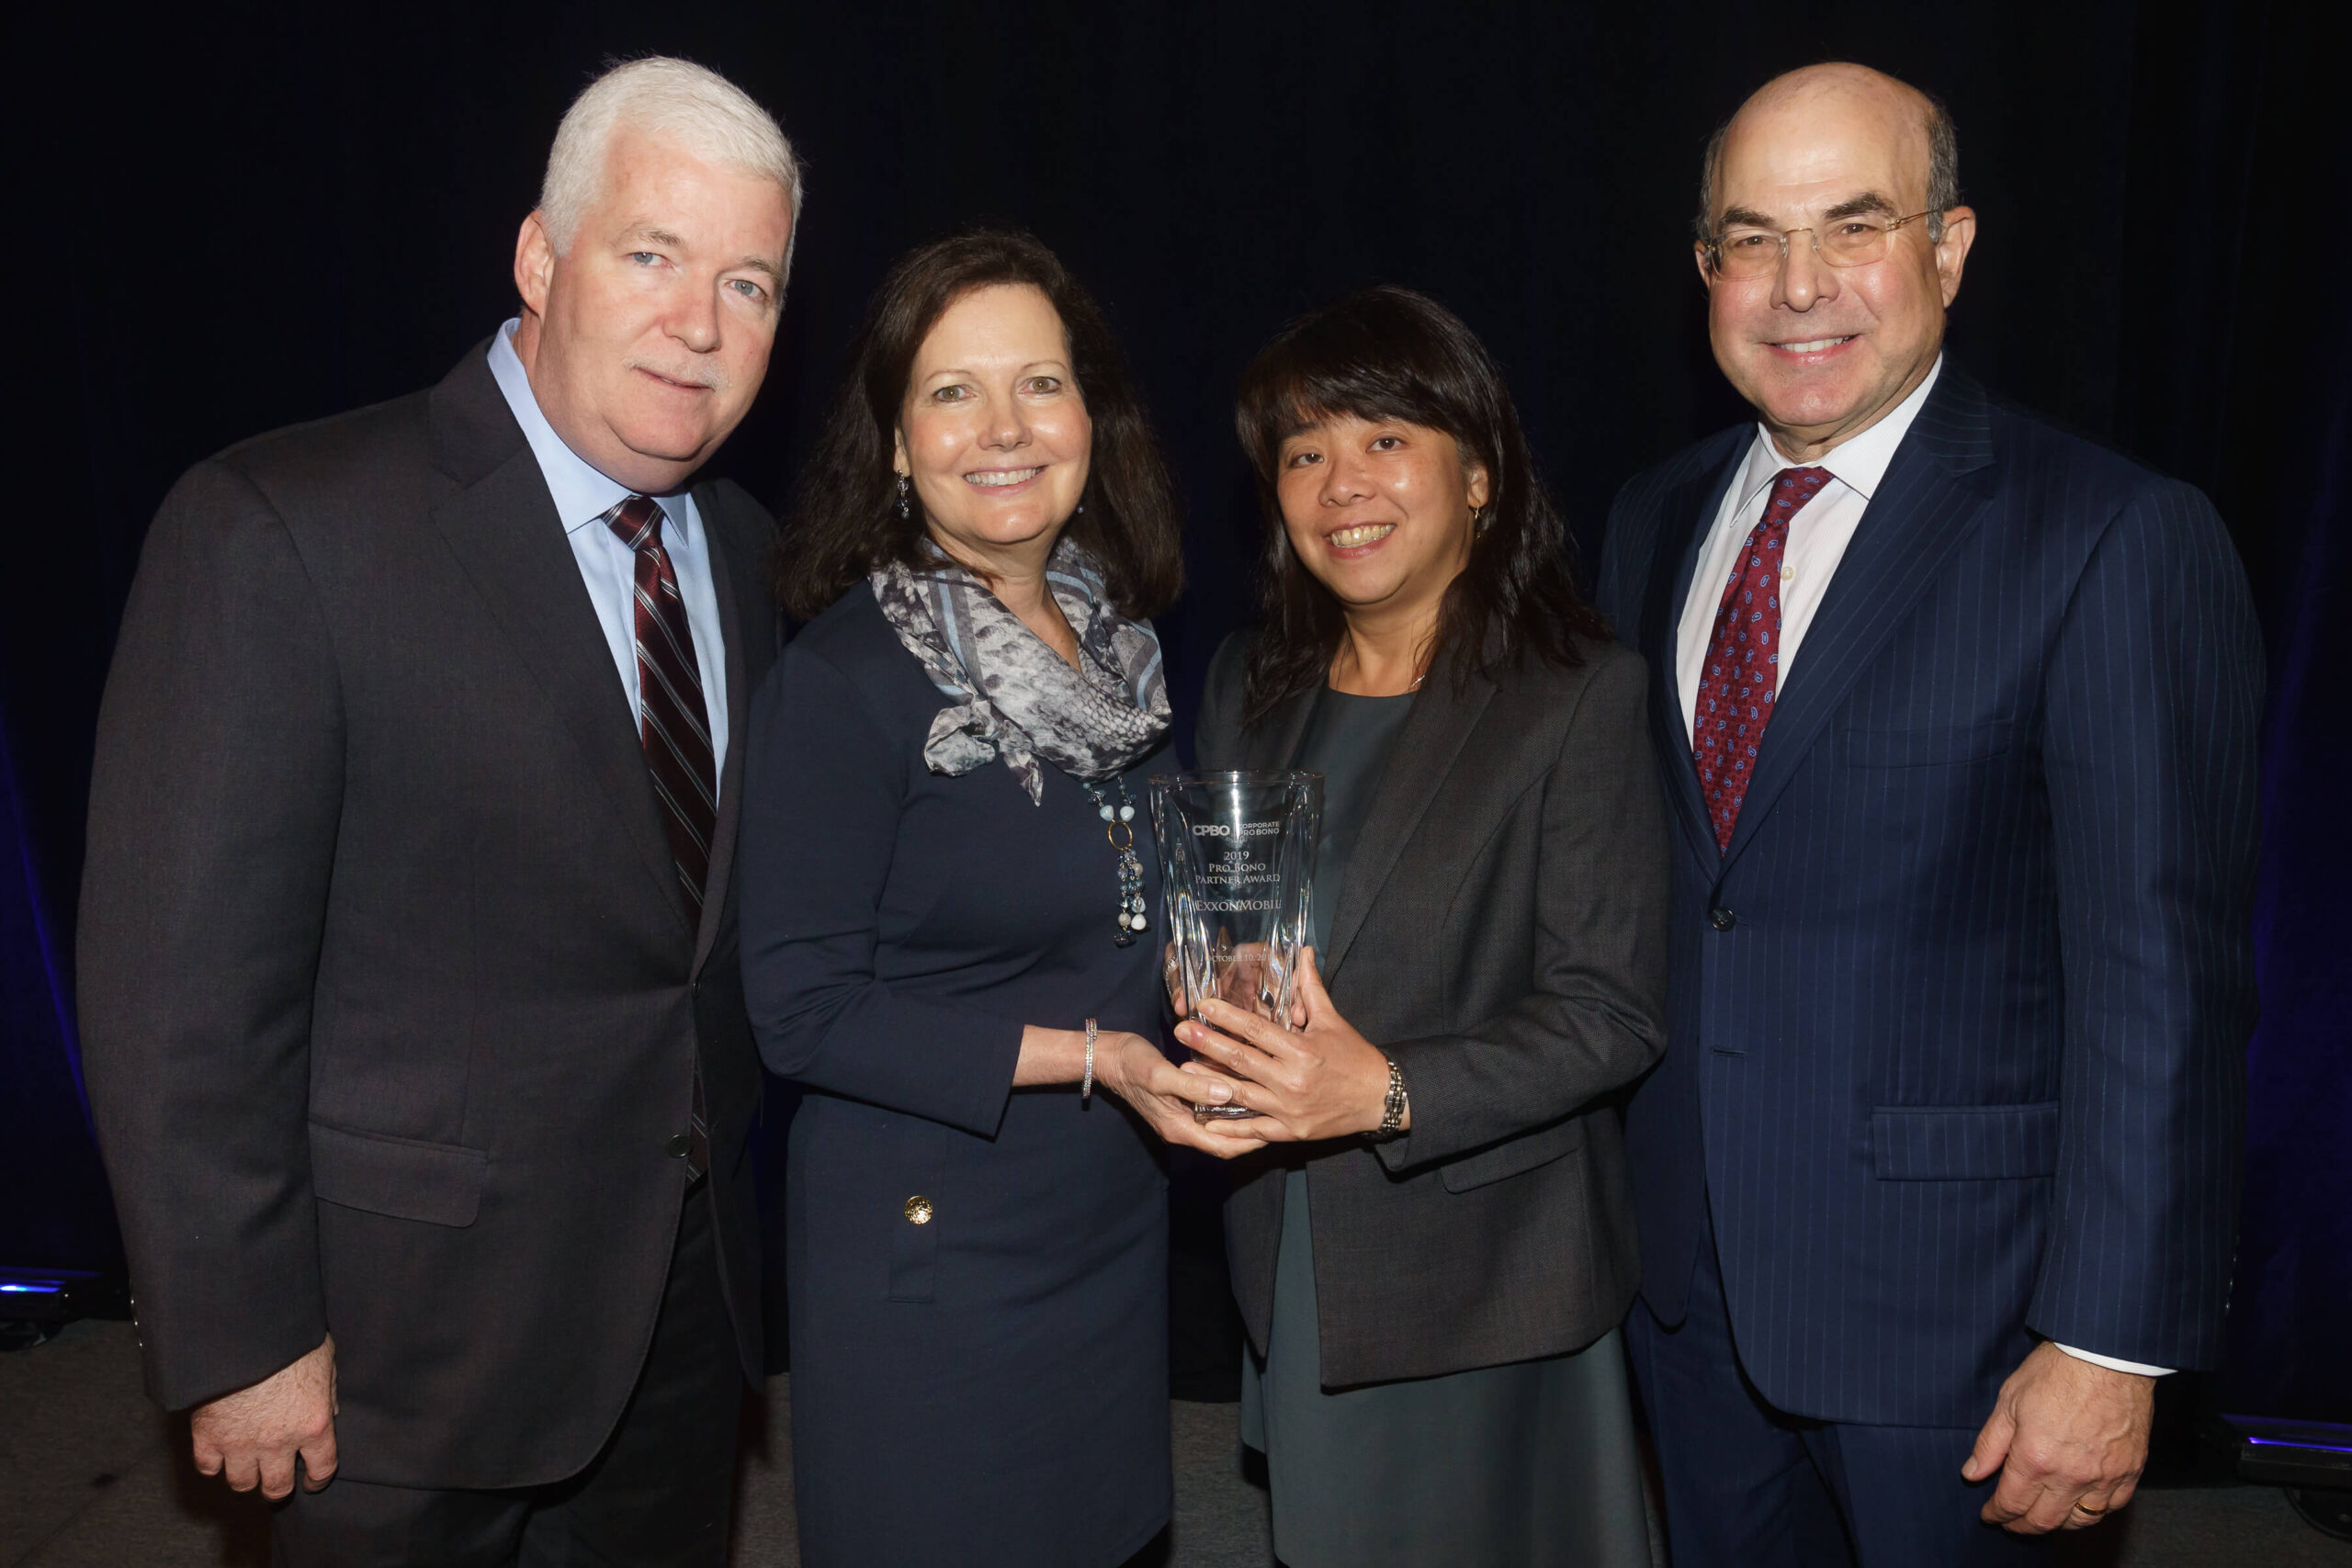 ExxonMobil recognized by Pro Bono Institute for work with Catholic Charities' Cabrini Center